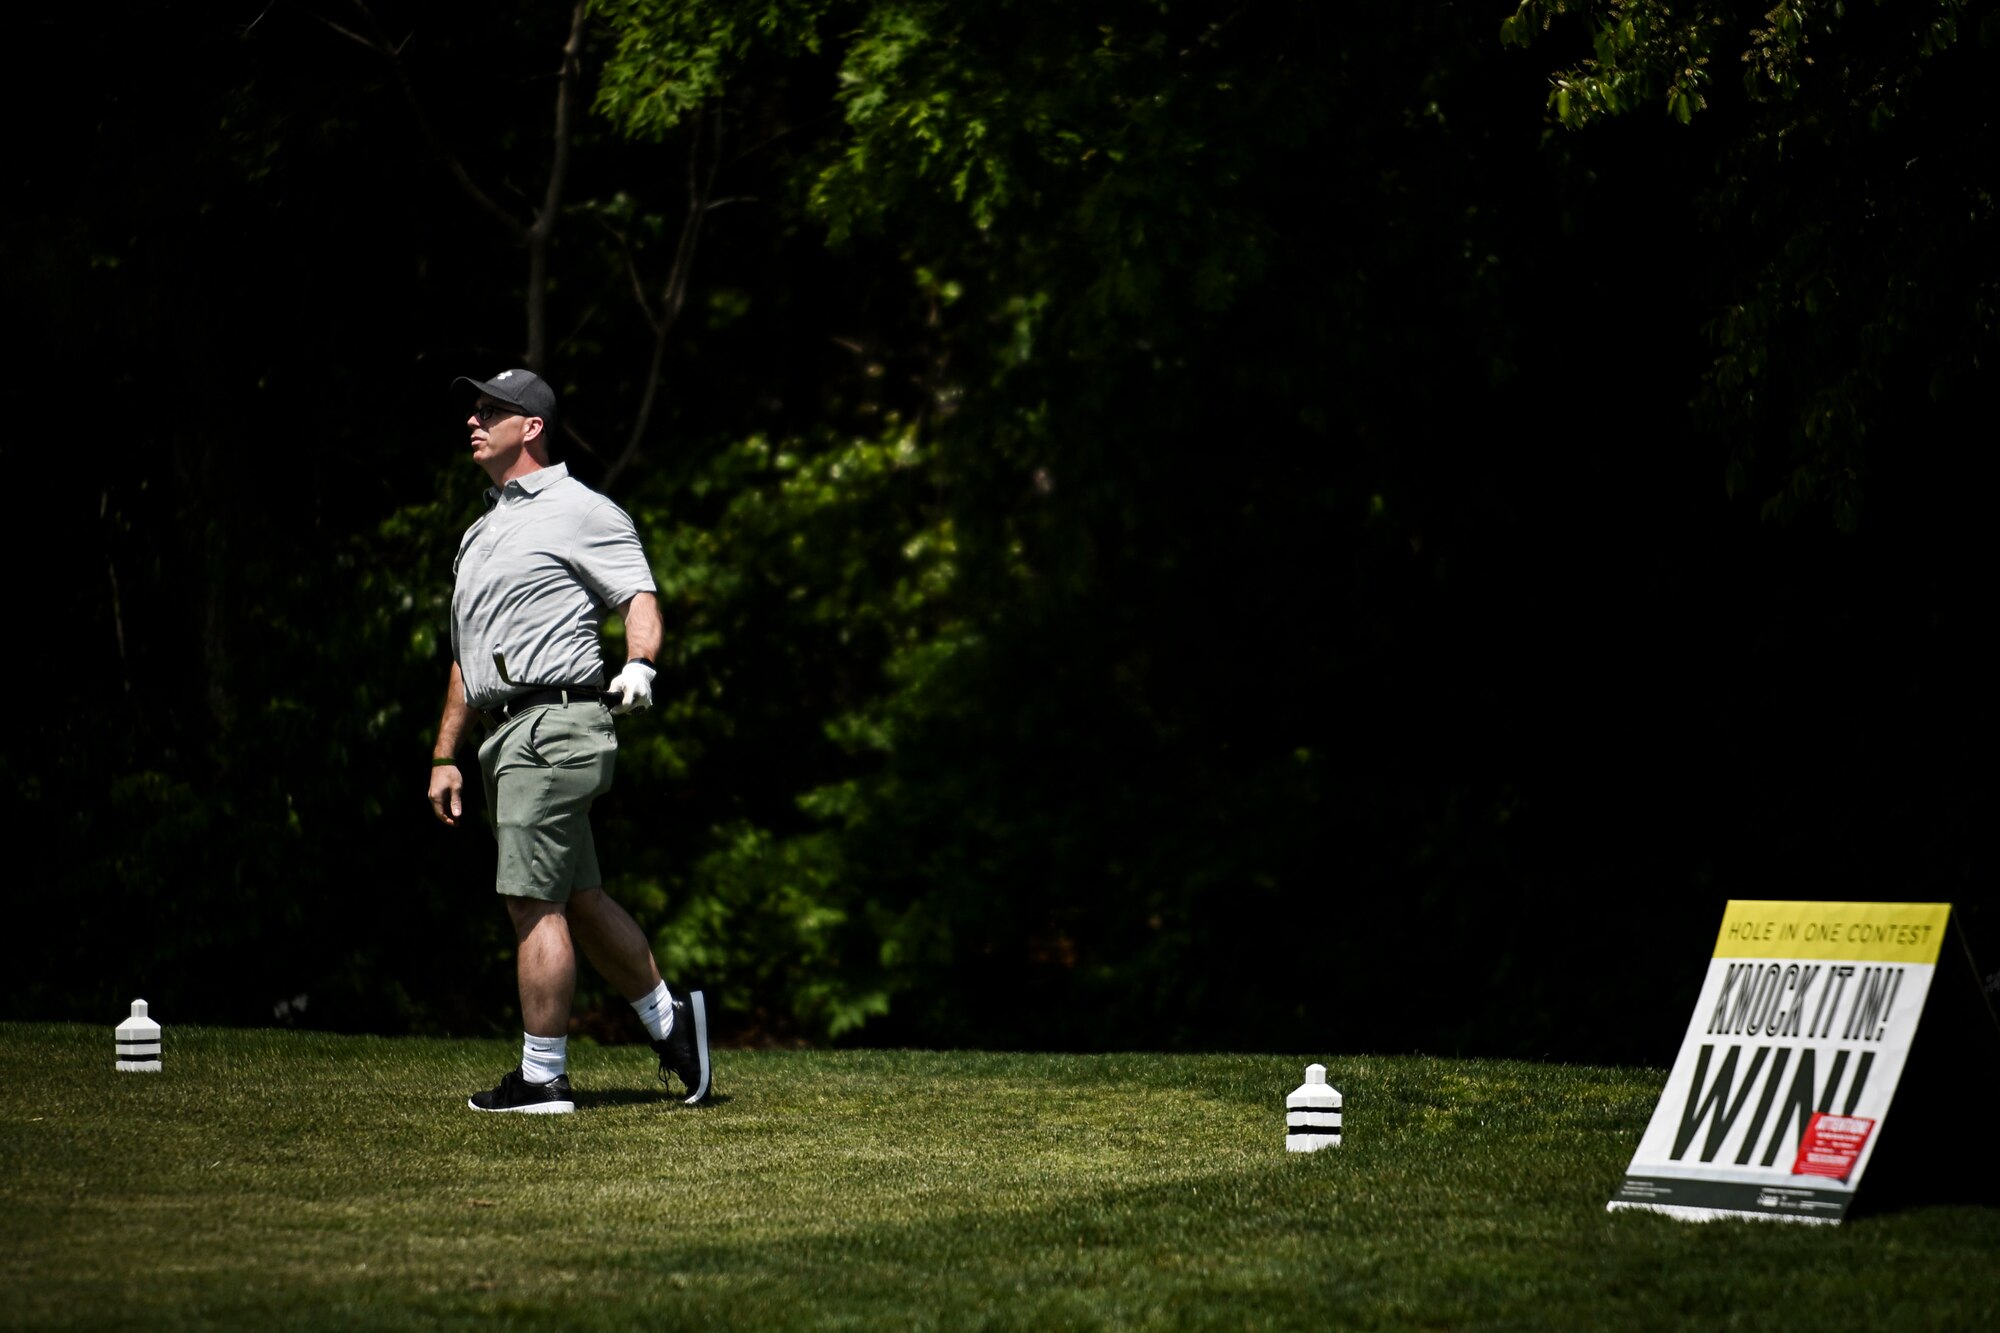 Chief Master Sgt. Timothy Bayes, 436th Airlift Wing command chief, watches his golf ball after teeing off during the Bluesuiters Golf Tournament at Jonathan’s Landing Golf Course in Magnolia, Delaware, May 11, 2023. Bluesuiters is a biannual golf tournament aimed at connecting Team Dover Airmen with local civic and business leaders. (U.S. Air Force photo by Staff Sgt. Marco A. Gomez)